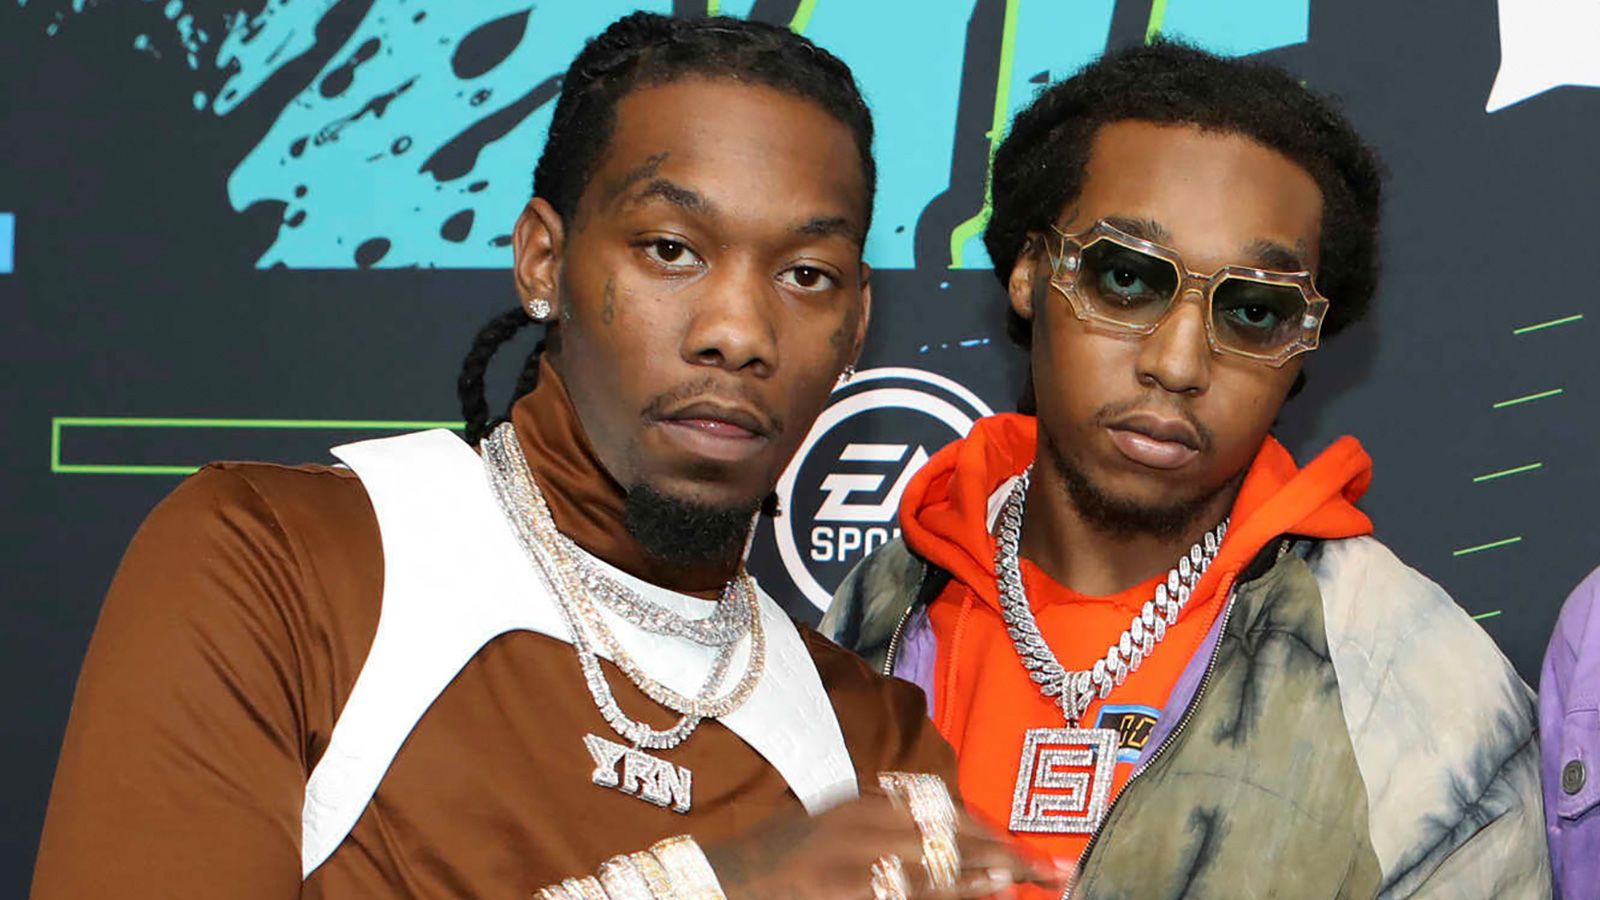 "I Wish I Can Hug You One Last Time" - Offset Pens Emotional Message To Late Cousin, Takeoff